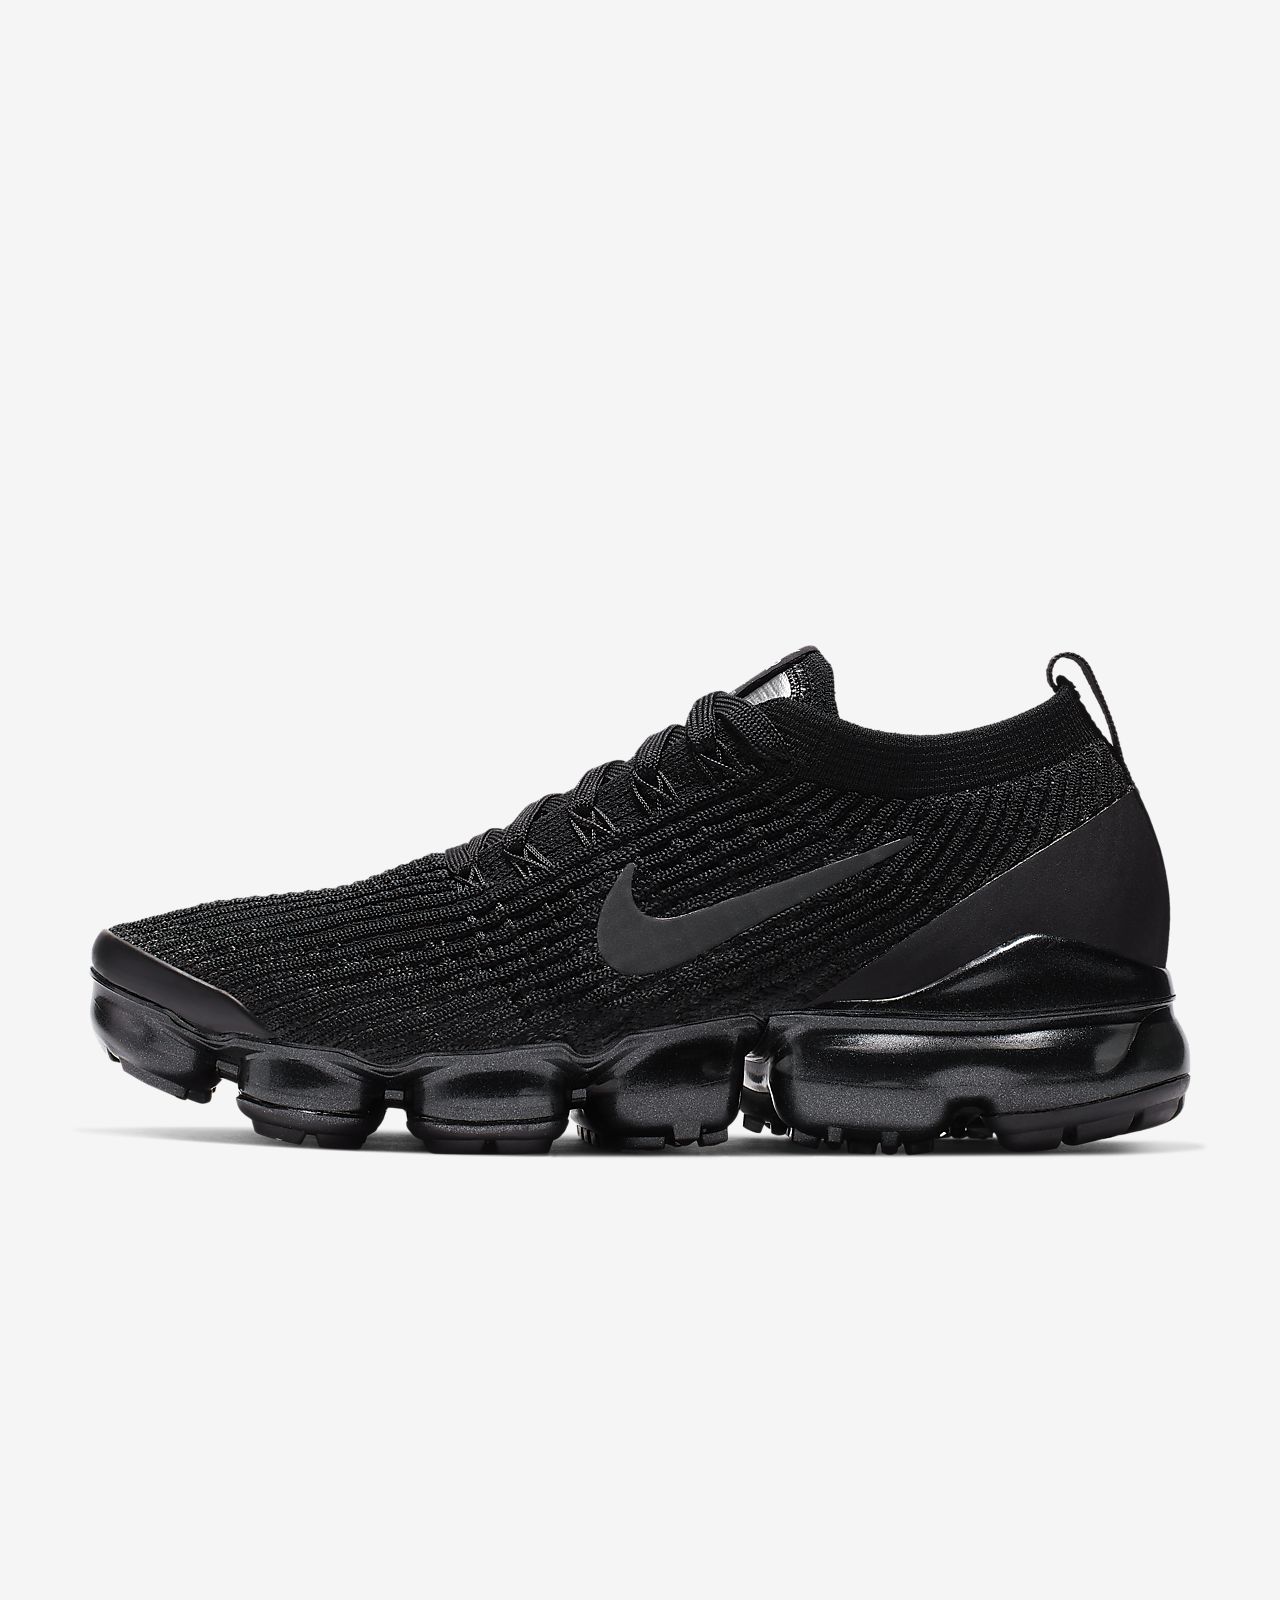 nike donna vapormax flyknit 2 rosa promo code for 9a638 496a1